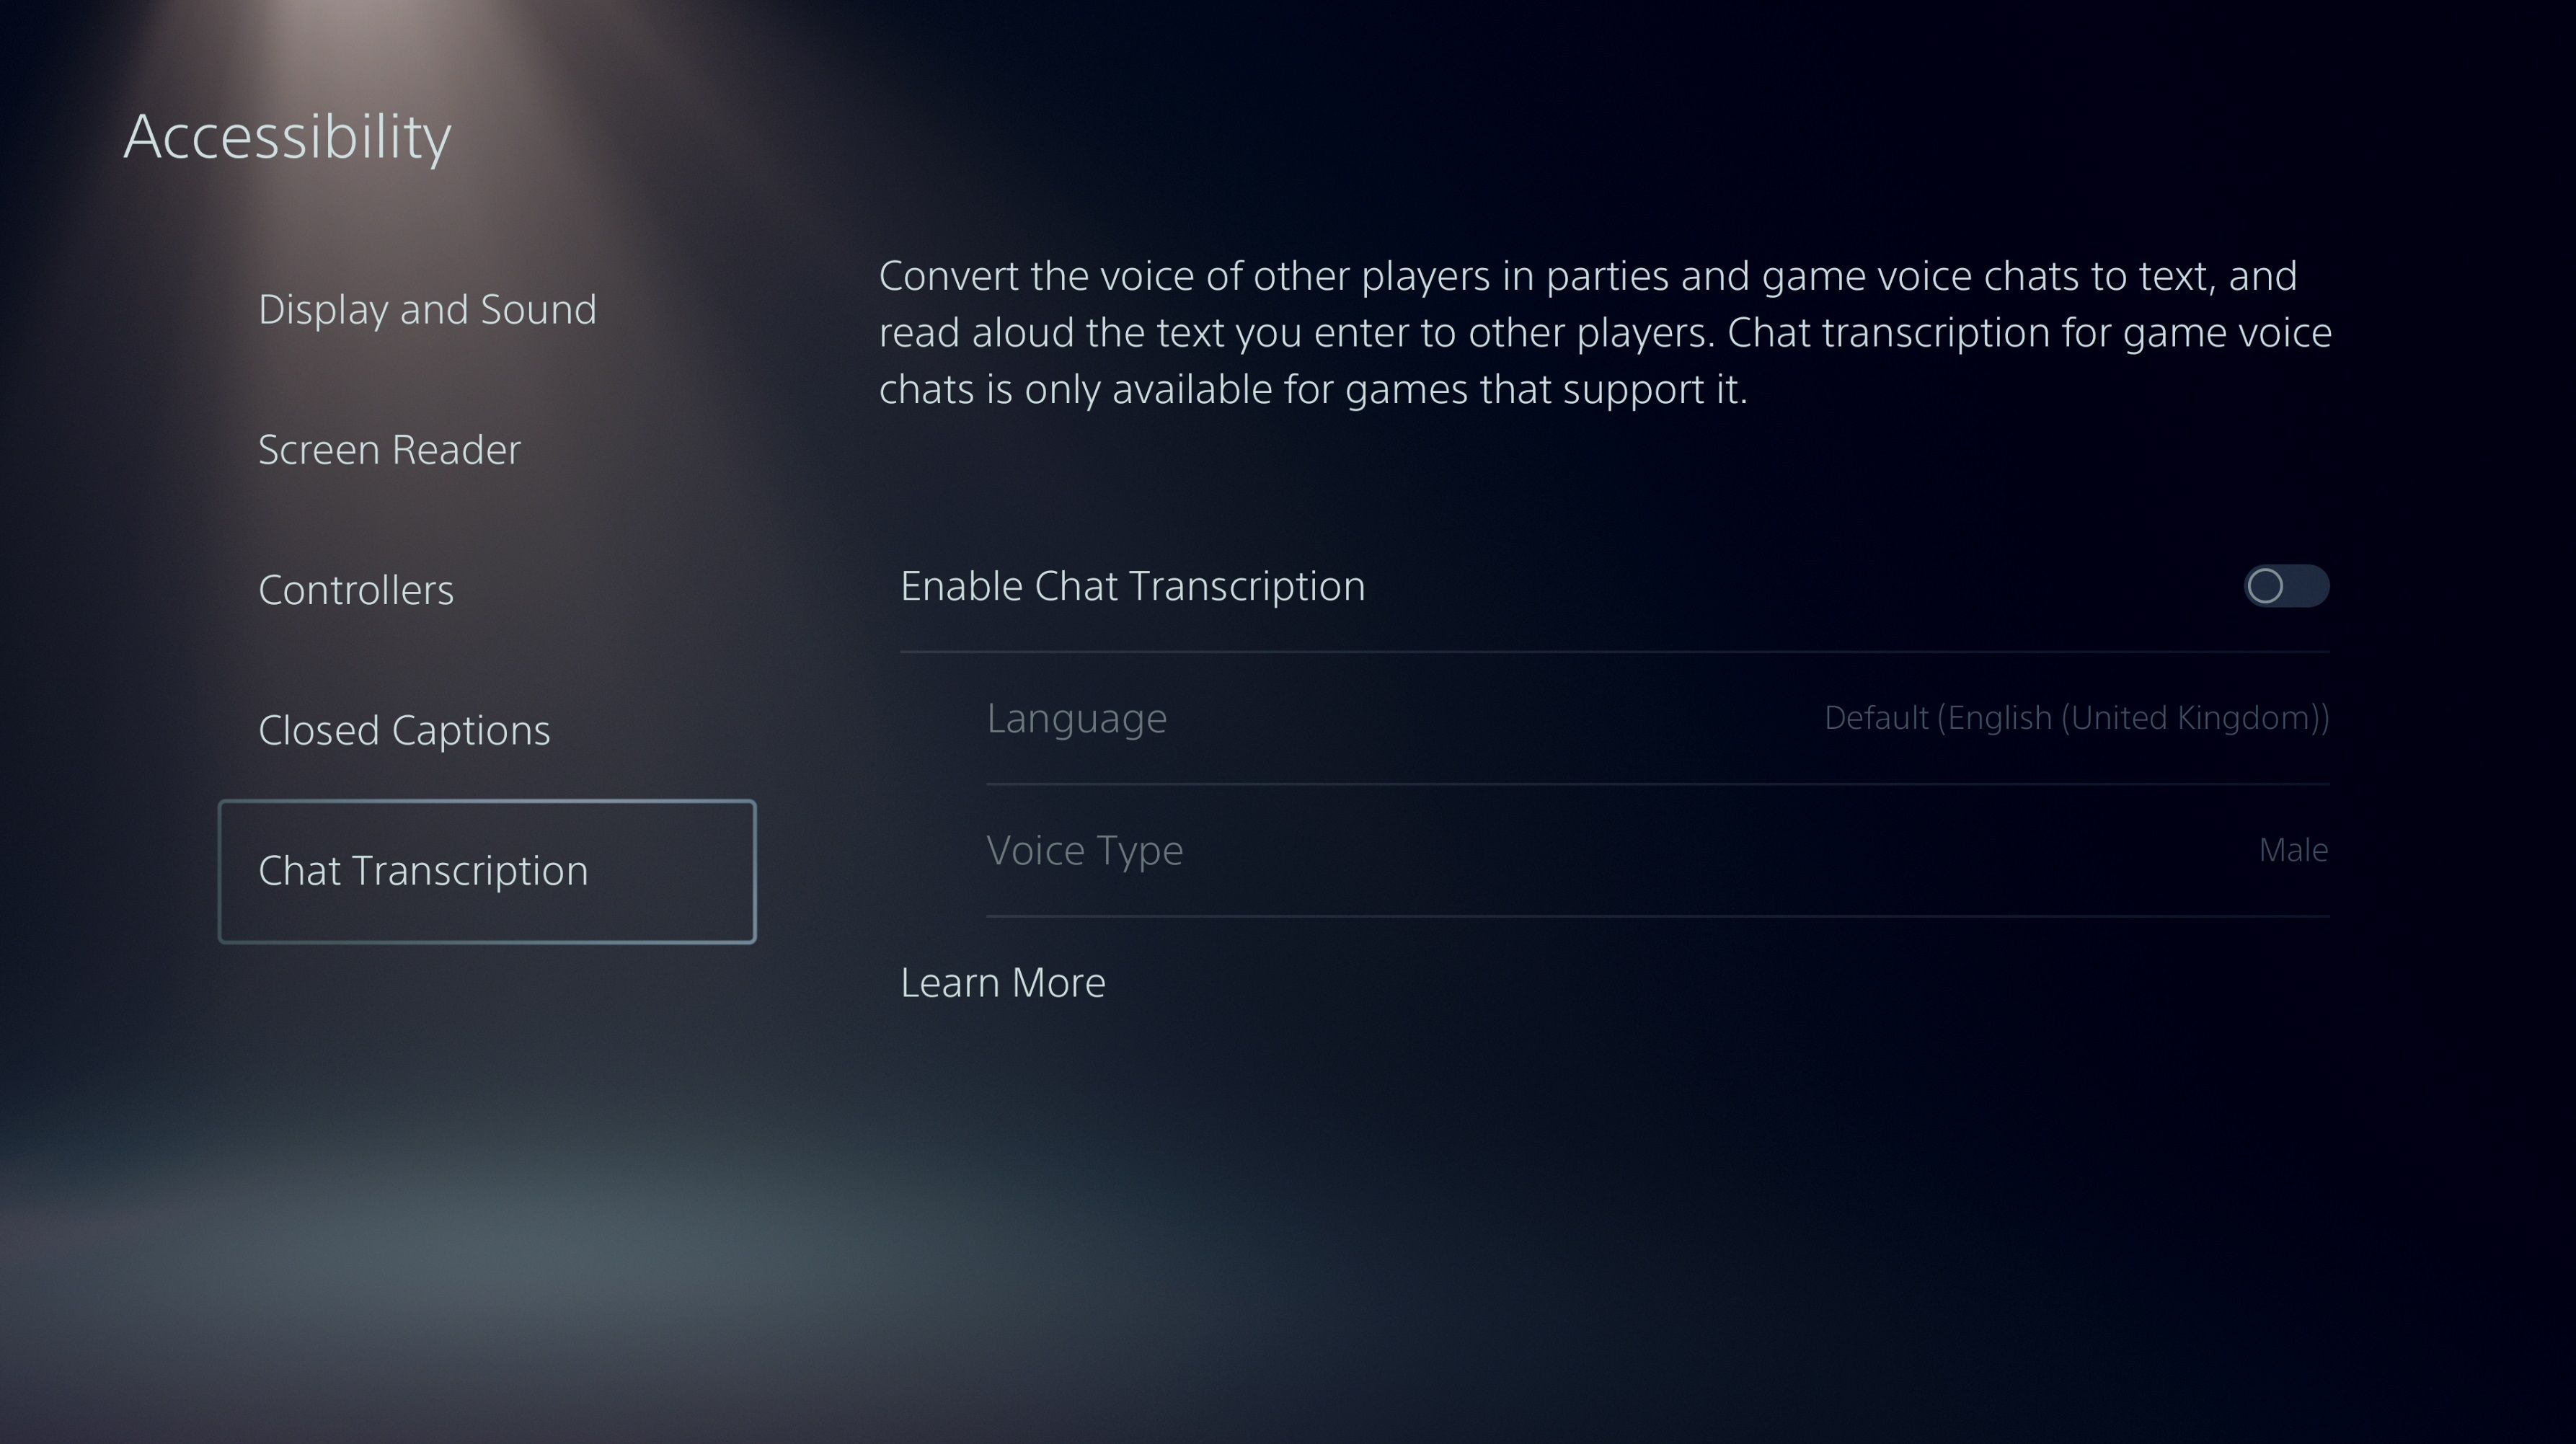 Enable Chat Transcription In Accessibility Settings on PS5 DualSense